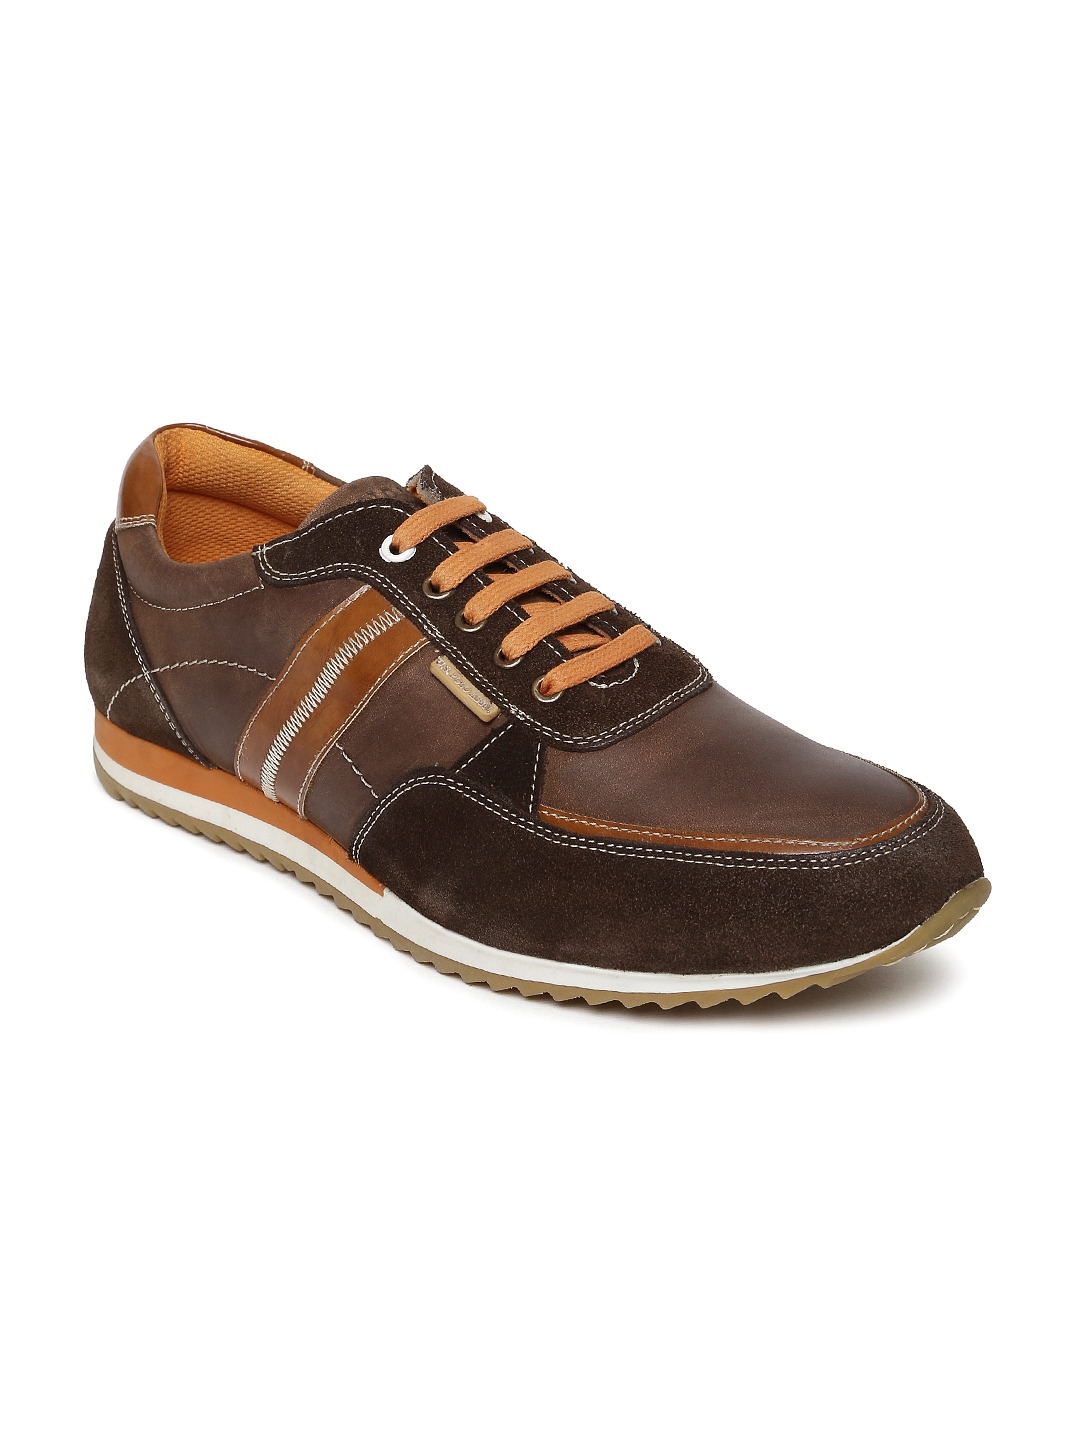 Buy U.S. Polo Assn. Men Brown Leather Sneakers - Casual Shoes for Men ...